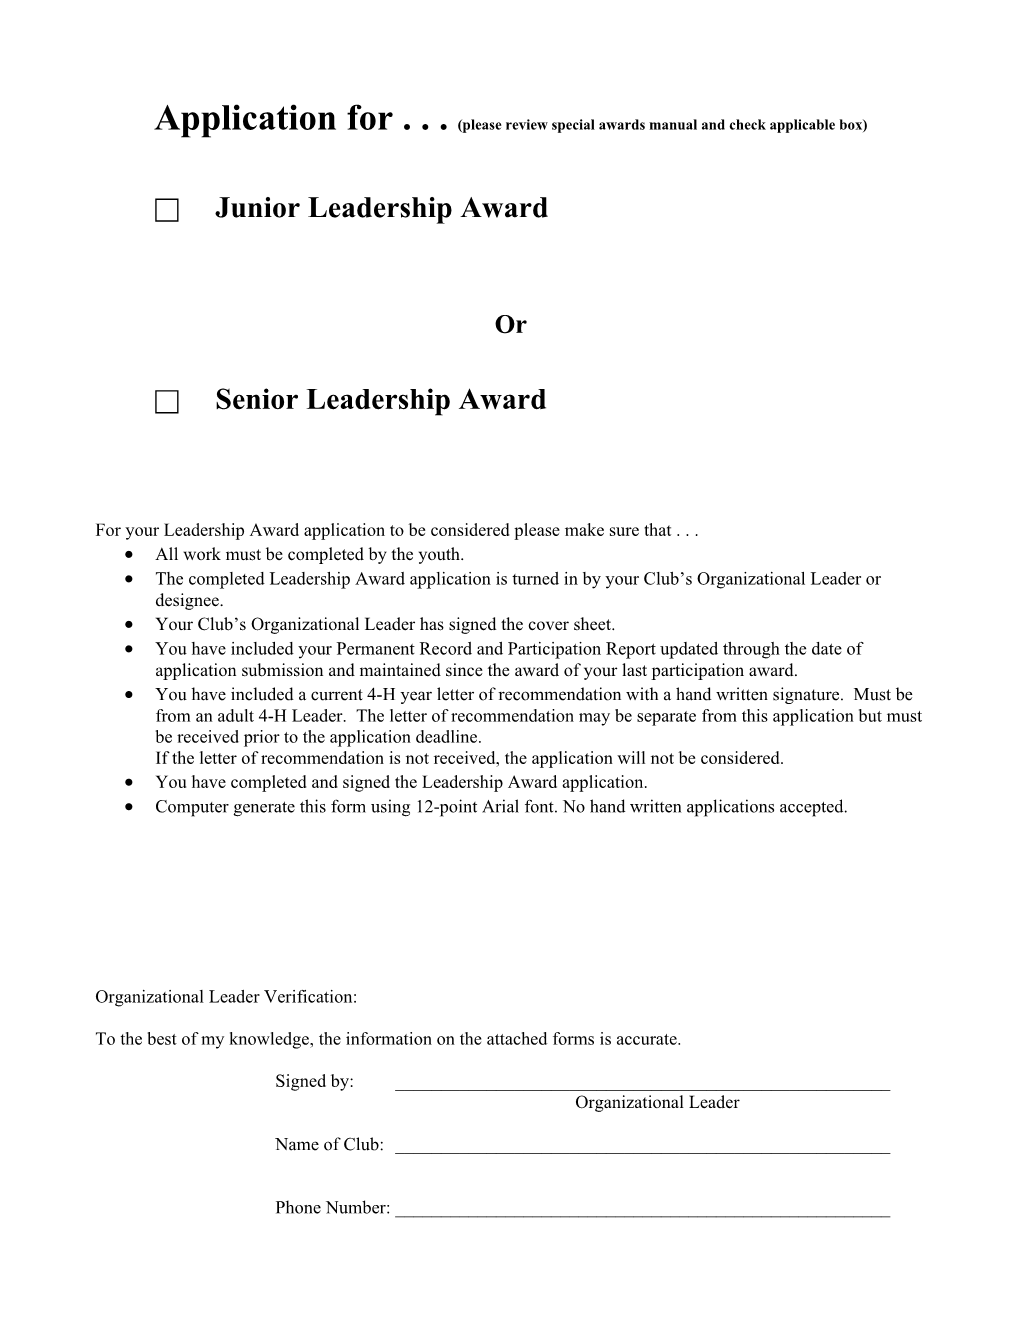 Application for . . . (Please Review Special Awards Manual and Check Applicable Box)